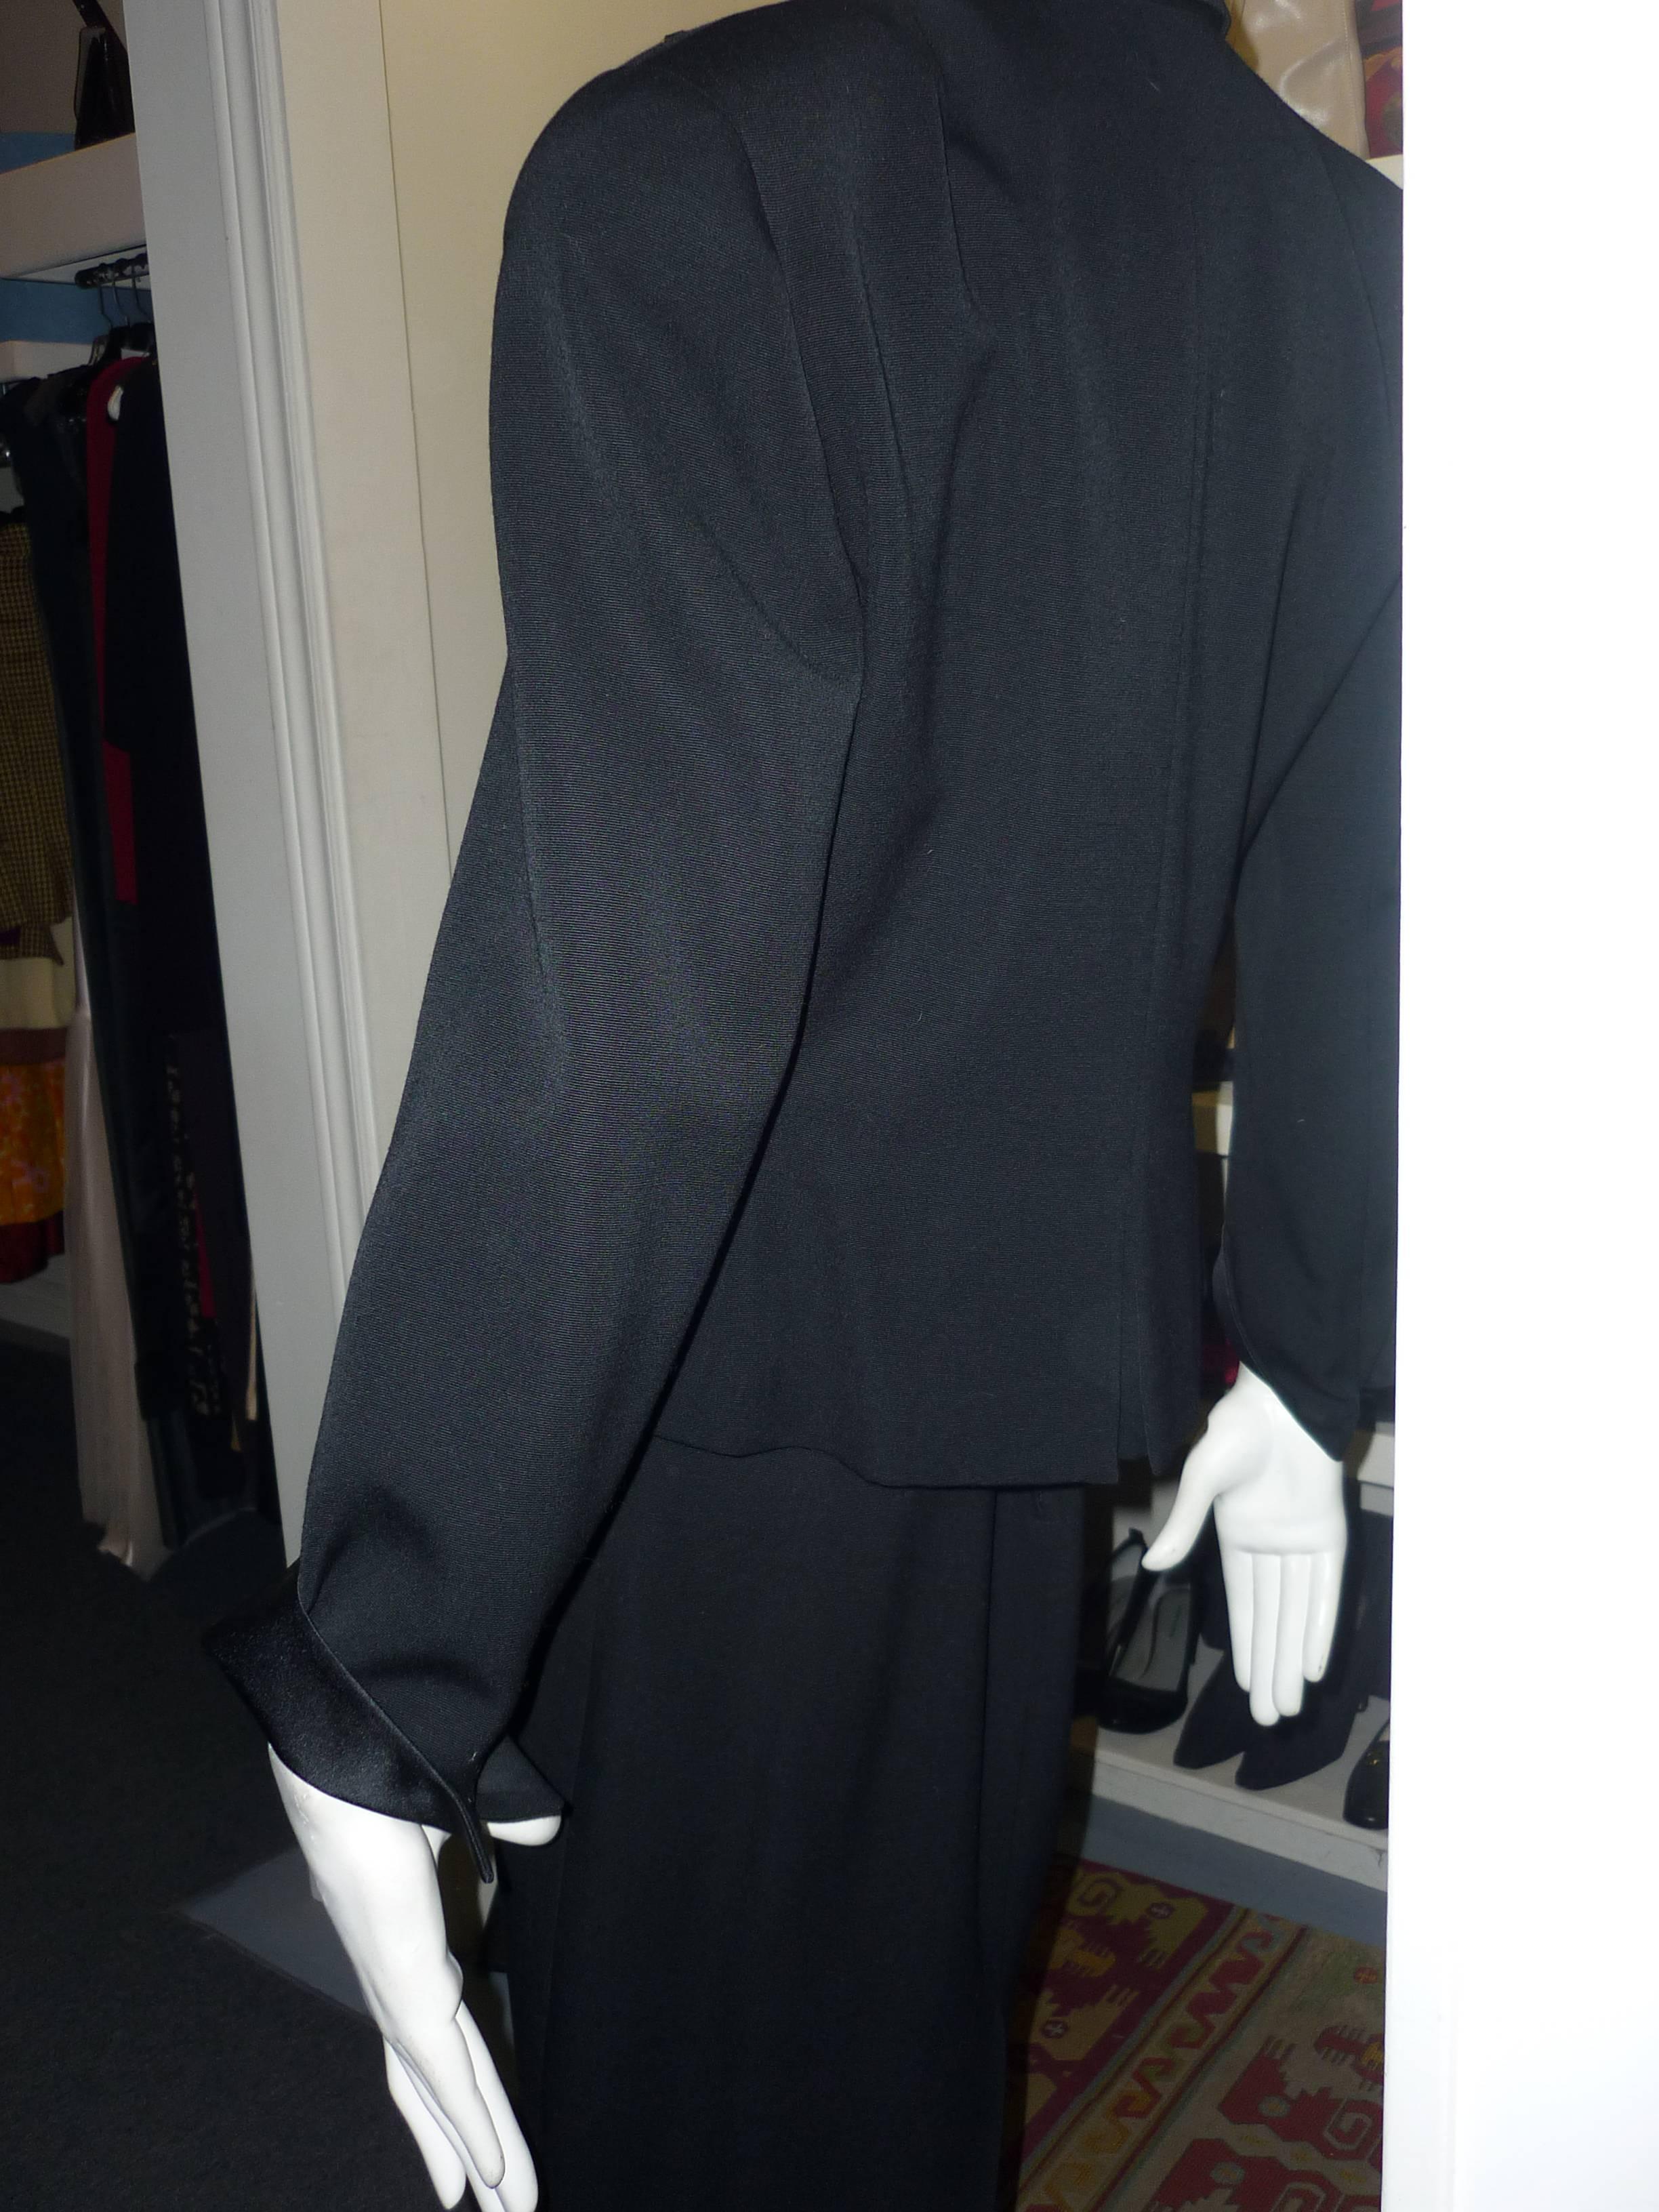 This lovely suit comprises of a tuxedo jacket with a peplum look and a fake back slit; satin lapels/cuffs and cufflink closure, a satin vest with six gold and black buttons, and a pencil skirt with slit side pockets. 

This is Christian Dior 